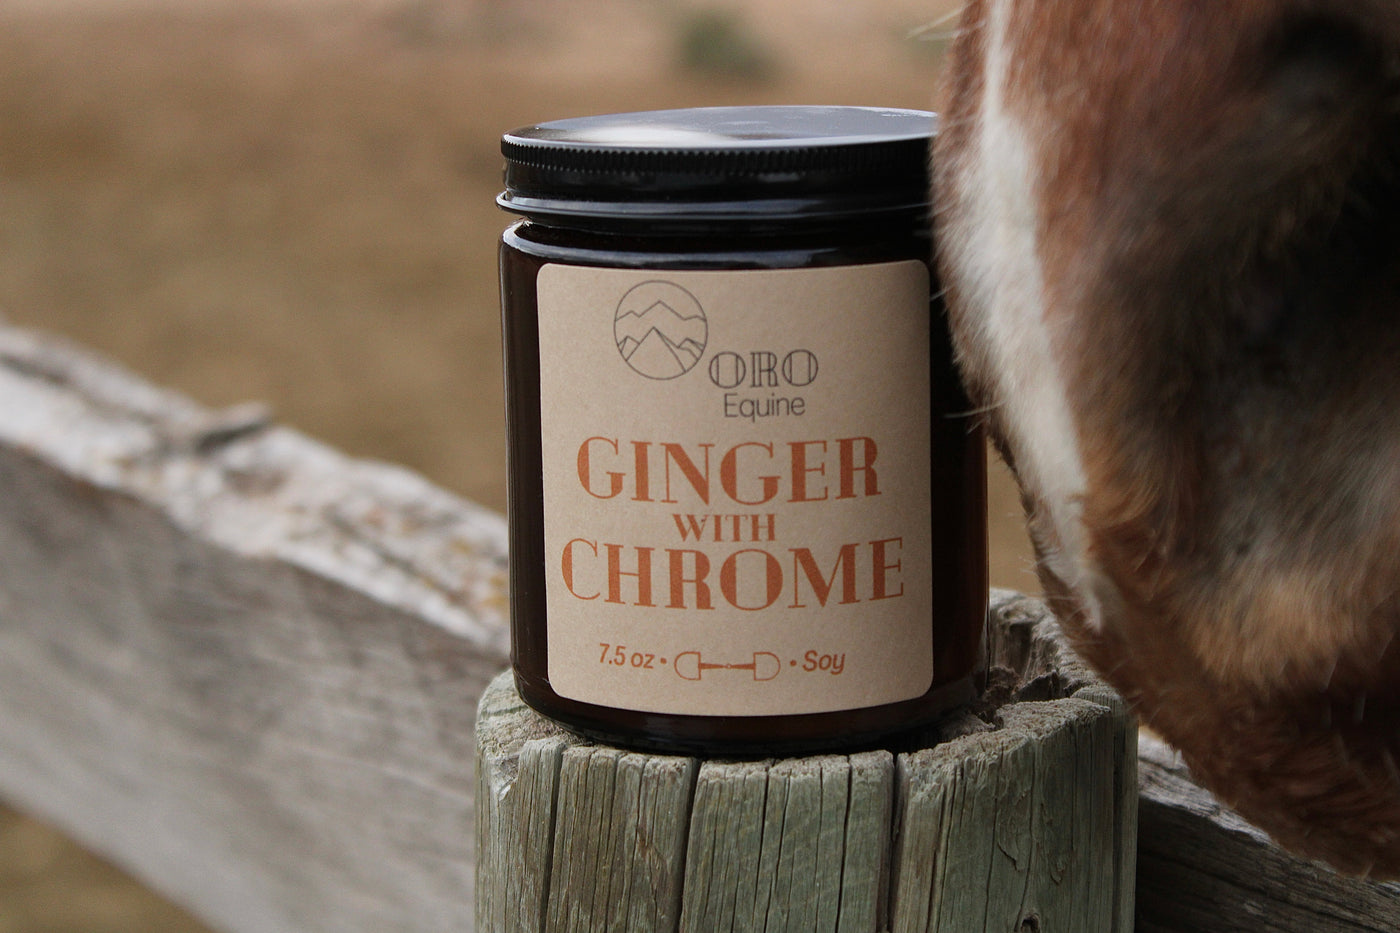 Ginger with Chrome soy candle